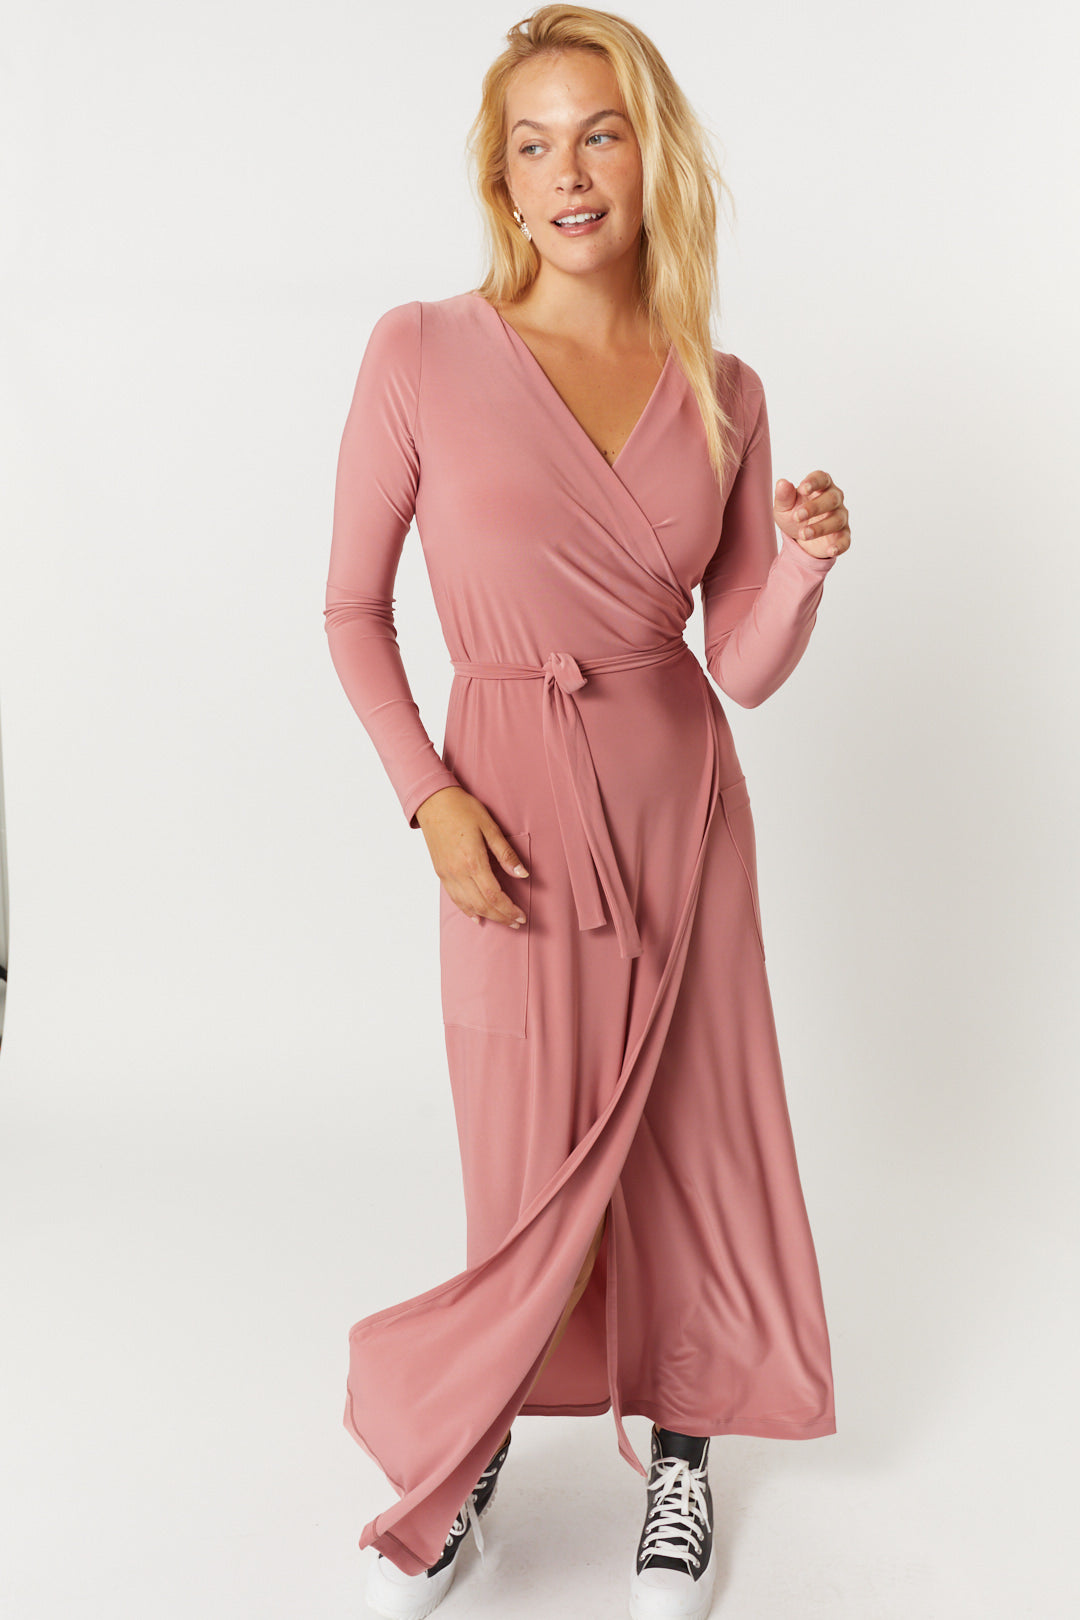 Robe portefeuille rose